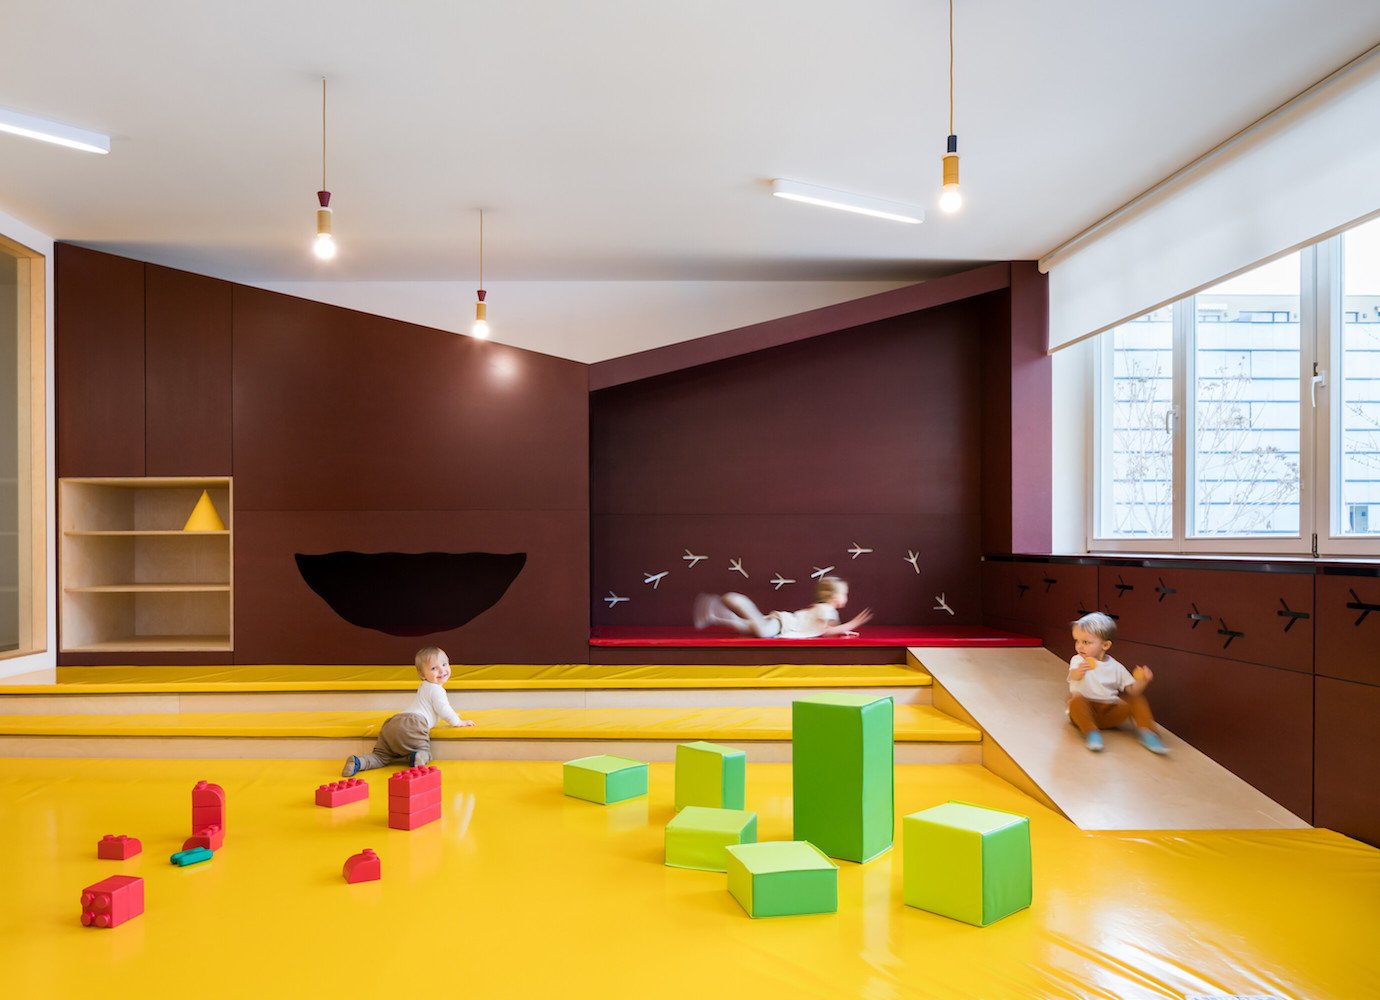 This Prague nursery design is dedicated to children’s hidey-holes and natural materials